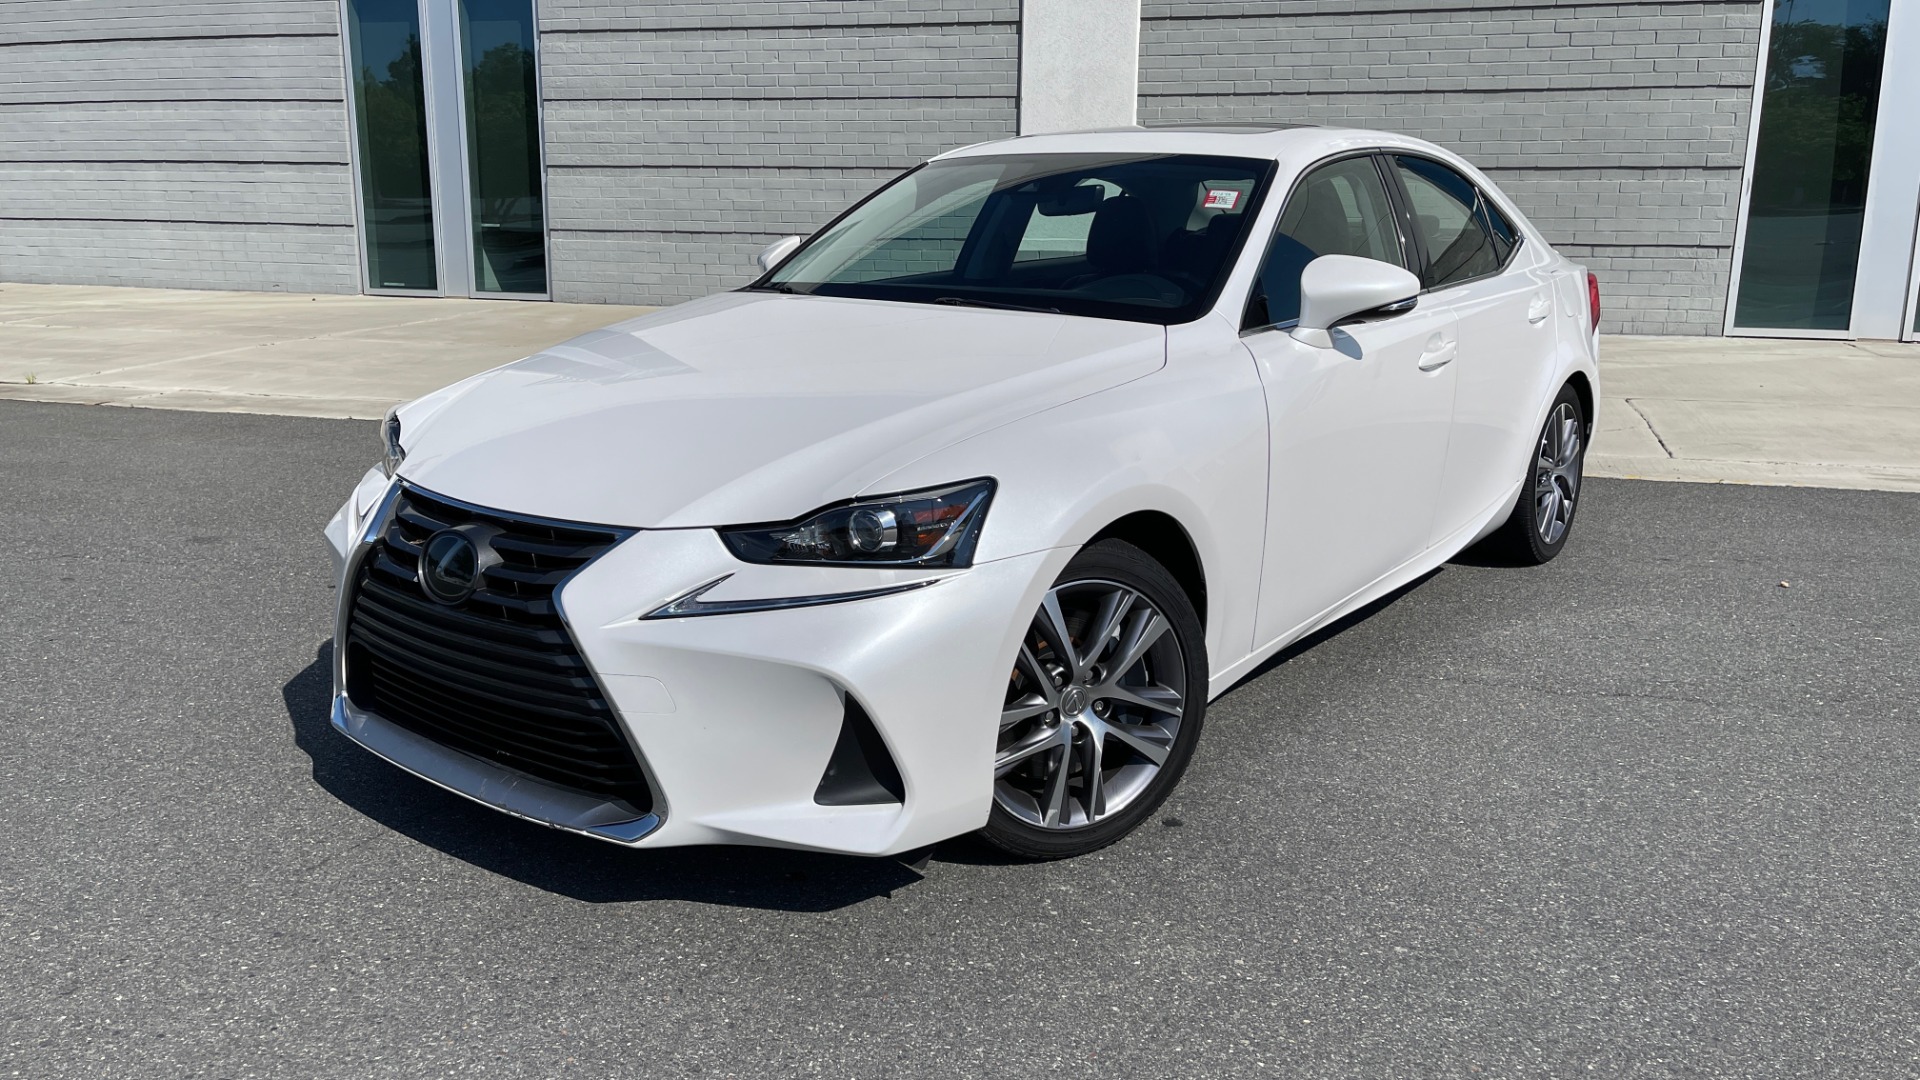 Used 2018 Lexus IS 300 / 2.0L TURBO / 8-SPD AUTO / SUNROOF / REARVIEW for sale Sold at Formula Imports in Charlotte NC 28227 1